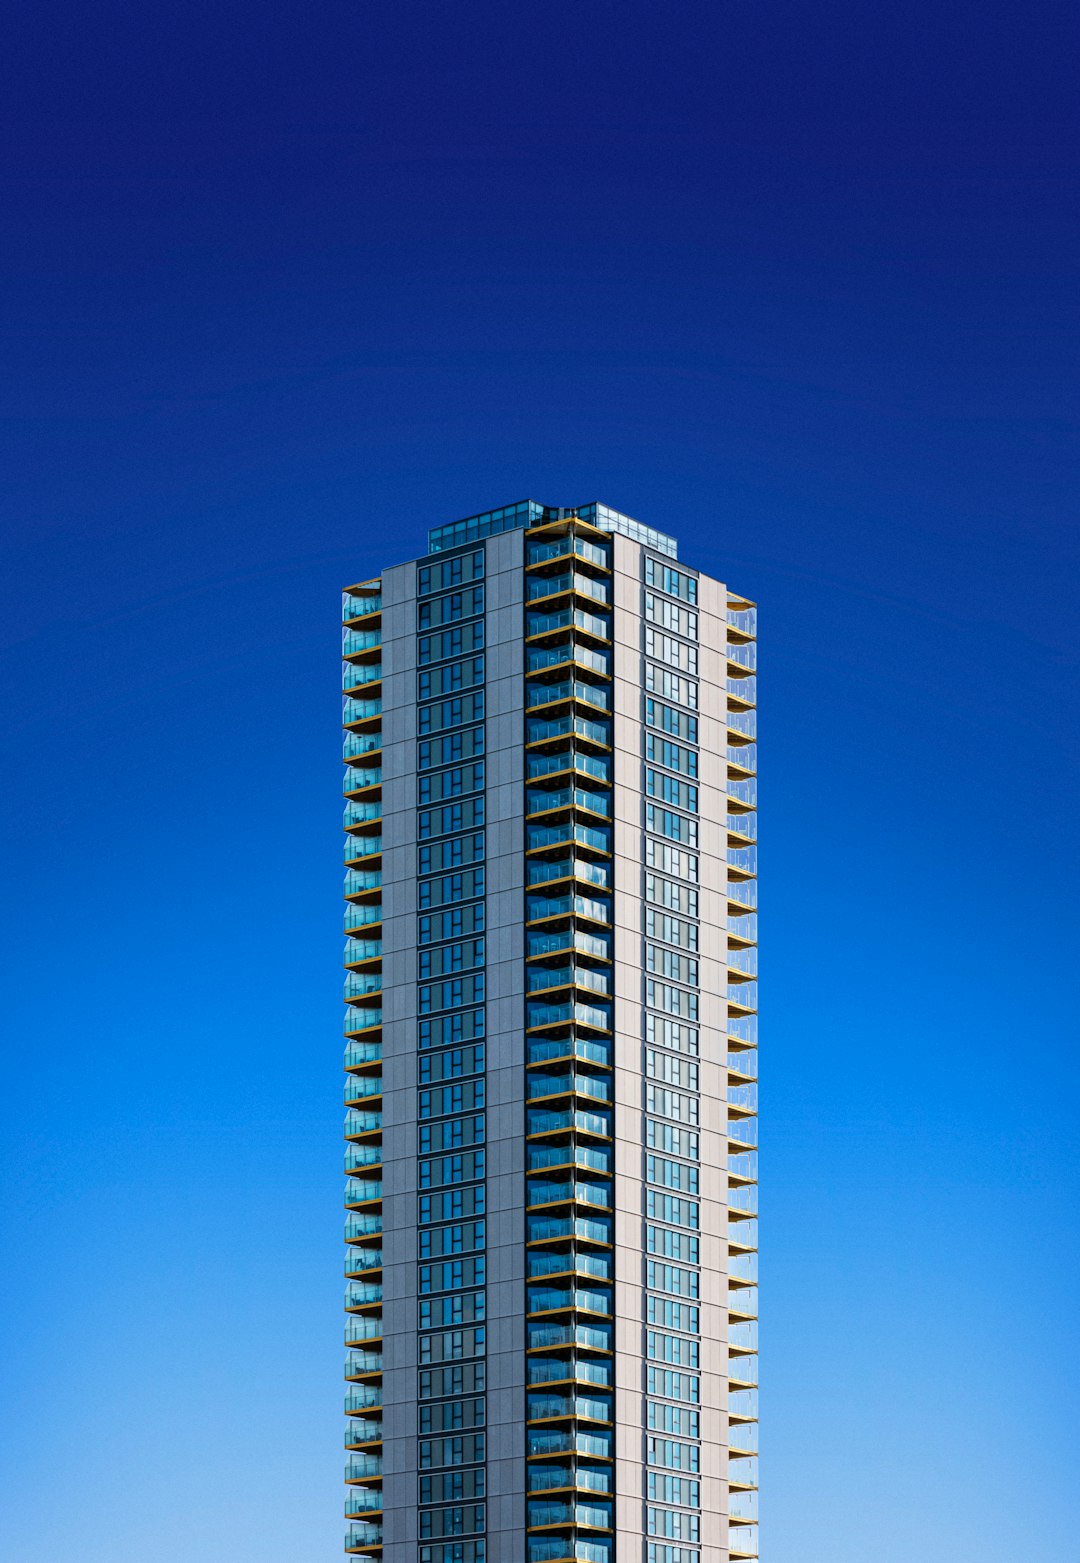 white and blue high rise building under blue sky during daytime